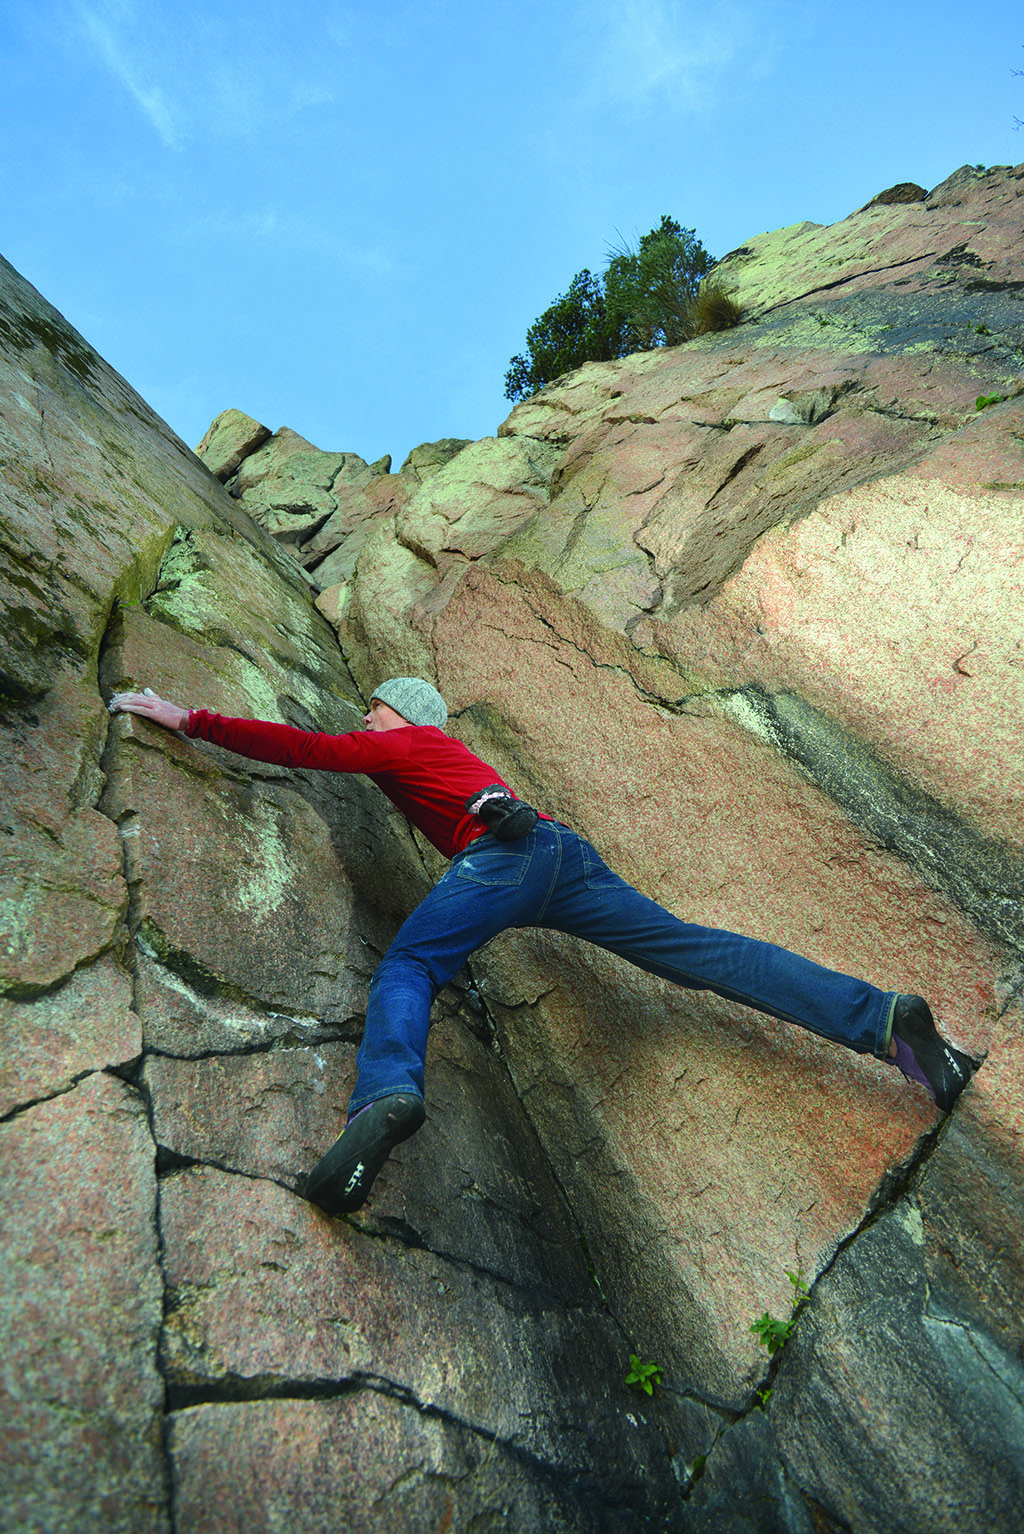 Jules Lines indulging in his love of free solo climbing (Photo: Angus Blackburn)